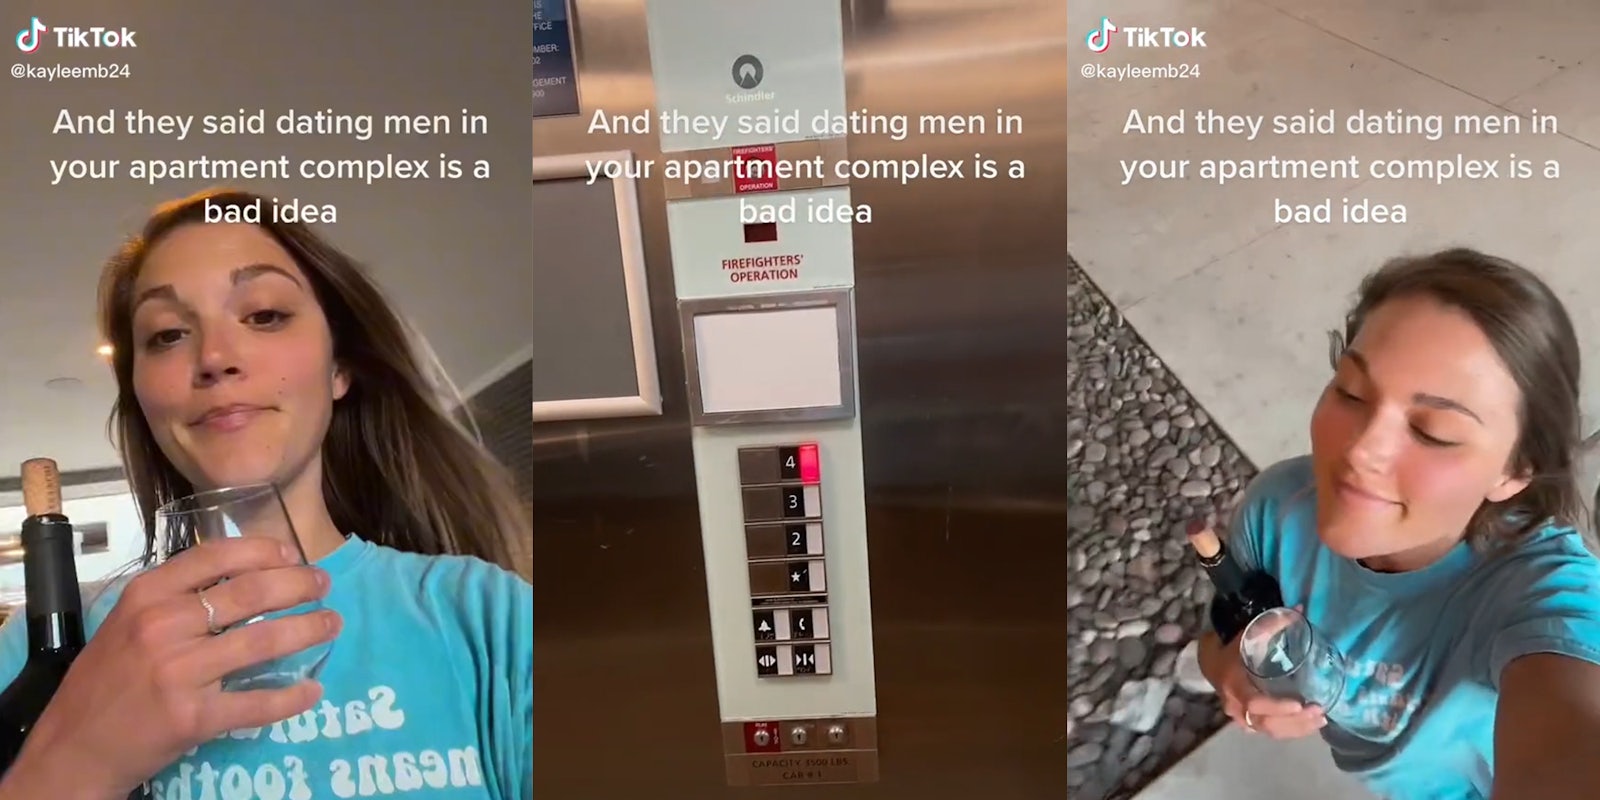 young woman with wine bottle and glass walking through apartment complex (l&r) elevator buttons (c) all with caption 'And they said daitng men in your apartment complex is a bad idea'